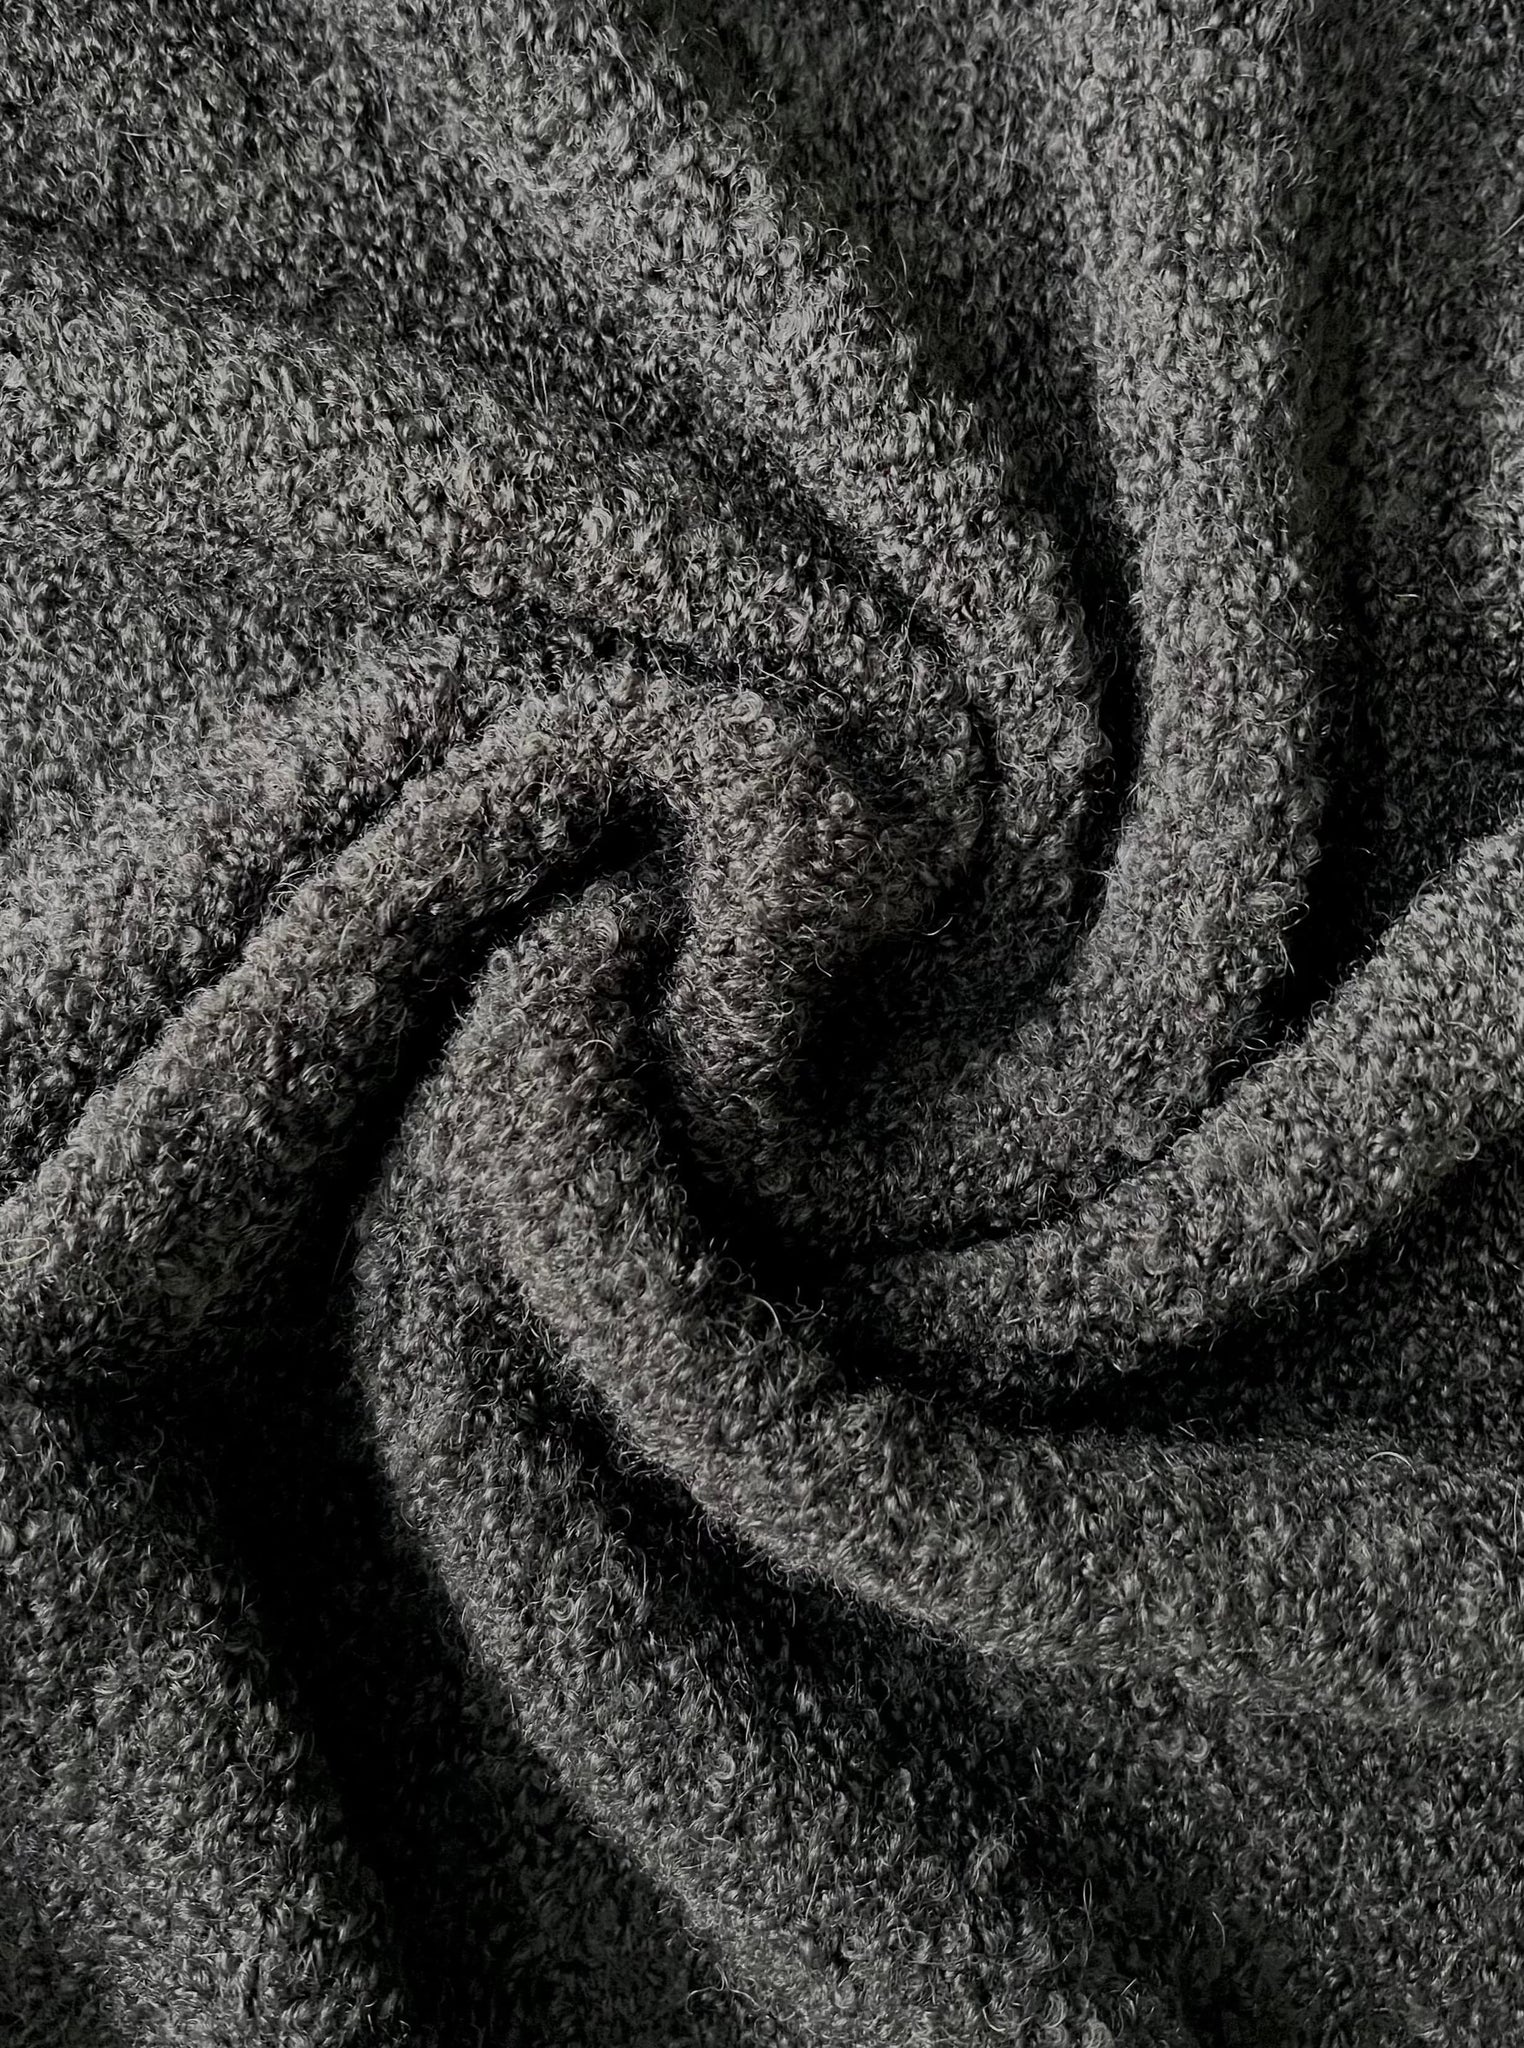 A close up image of a Canyon Wrap Sweater Coat - Charcoal Grey fabric.